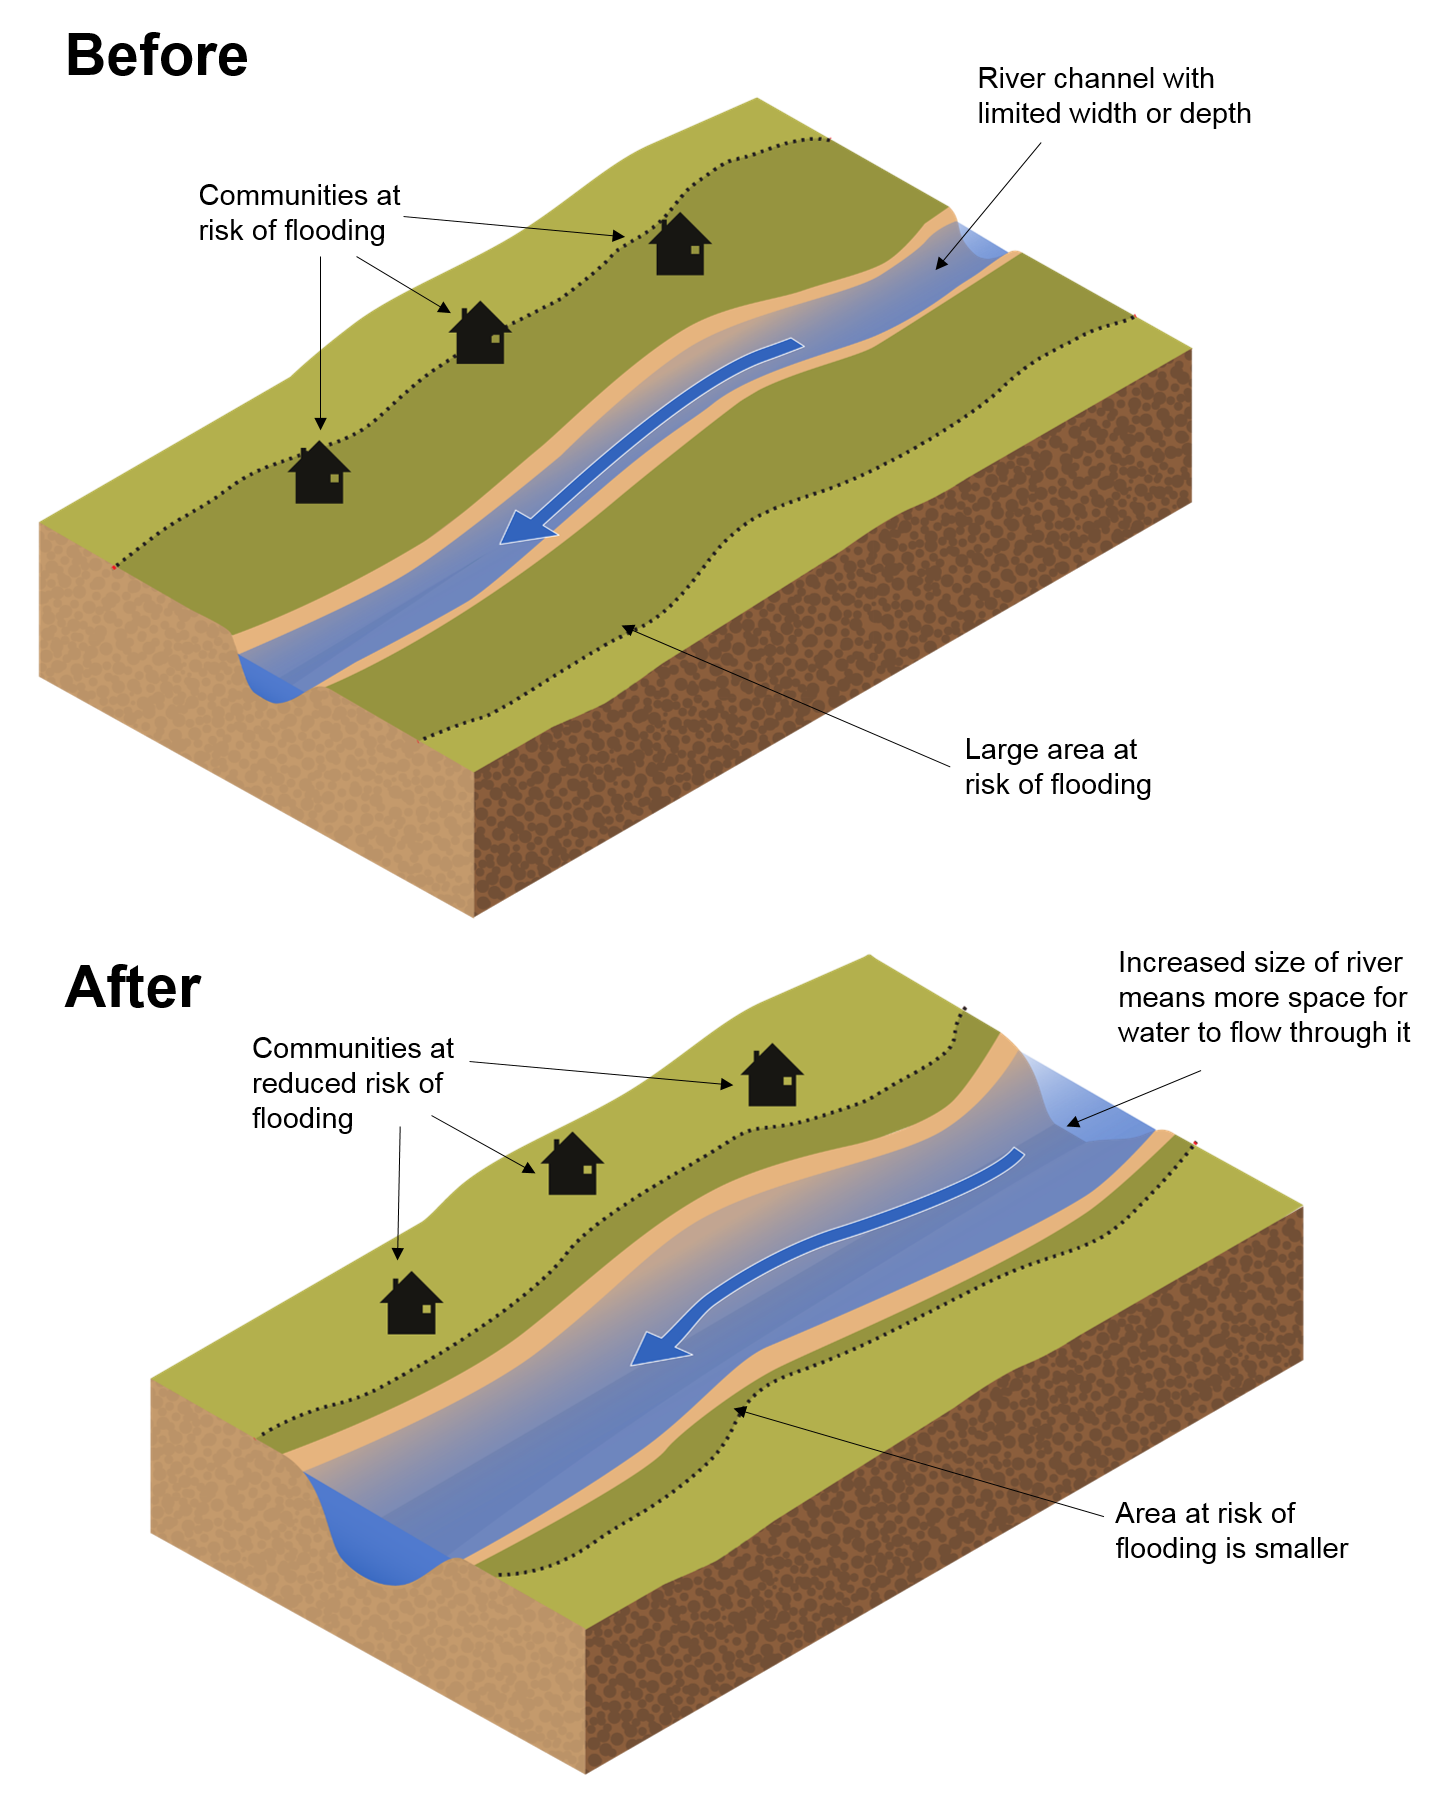 The before image shows a river with limited width or depth flowing across from the left to the right of the picture. Above the river are buildings representing communities at risk of flooding. The extent of the flood plain is shown to reach beyond the built-up areas. The after image shows a river flowing across from the left to the right of the picture that has been increased in depth and width. The increased size of the river means more space for water to flow through it making the area at risk of flooding smaller.